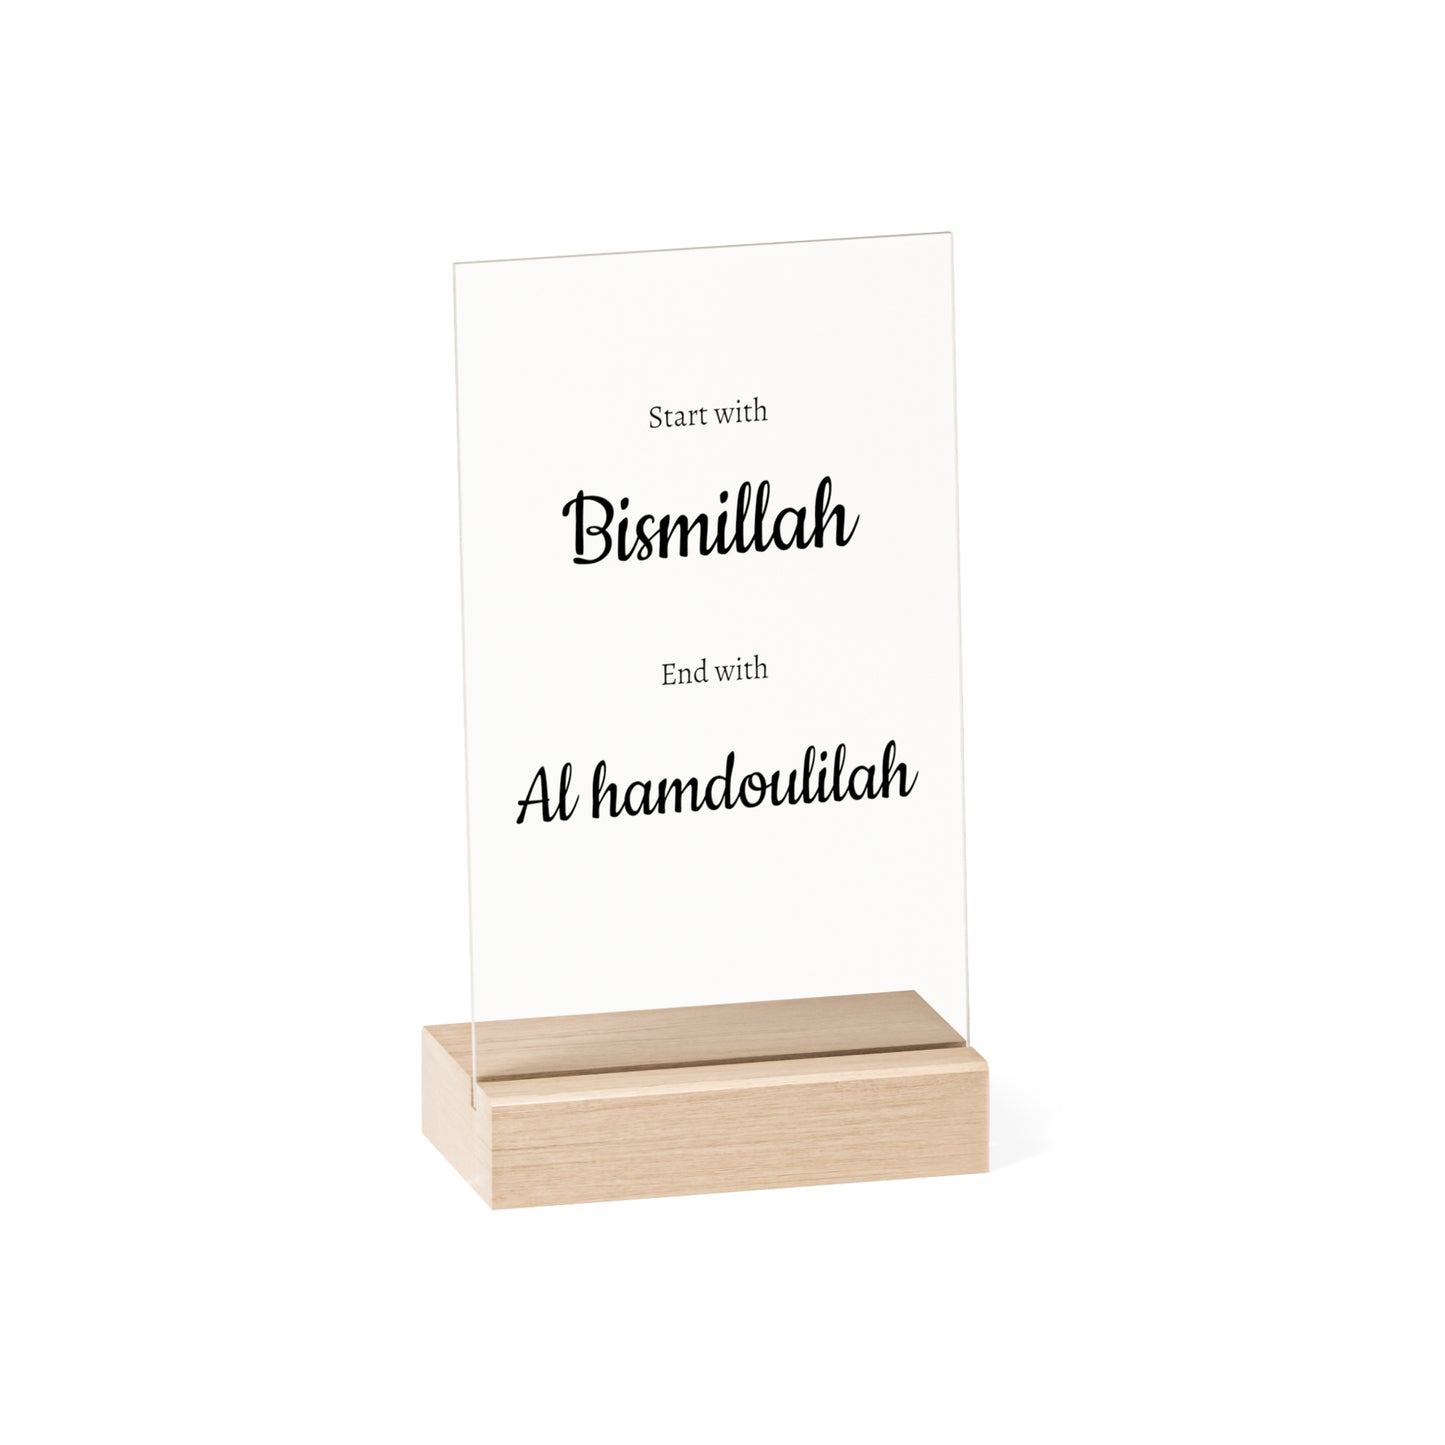 Acrylic Sign with Wooden Stand "Start with Bismillah and End with El Hamdoulilah"